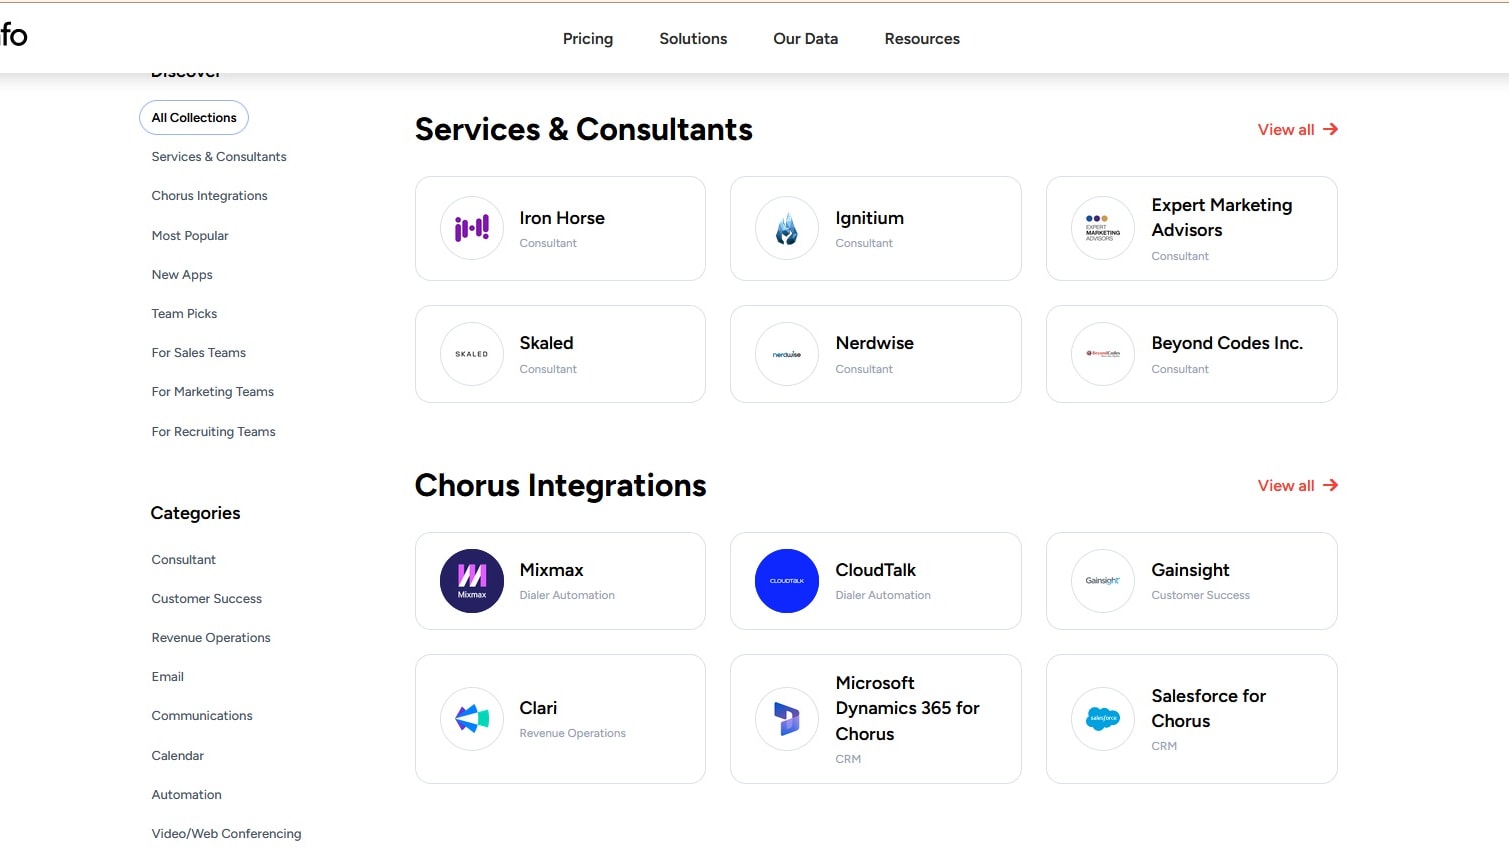 ZoomInfo boasts a broader array of native integrations